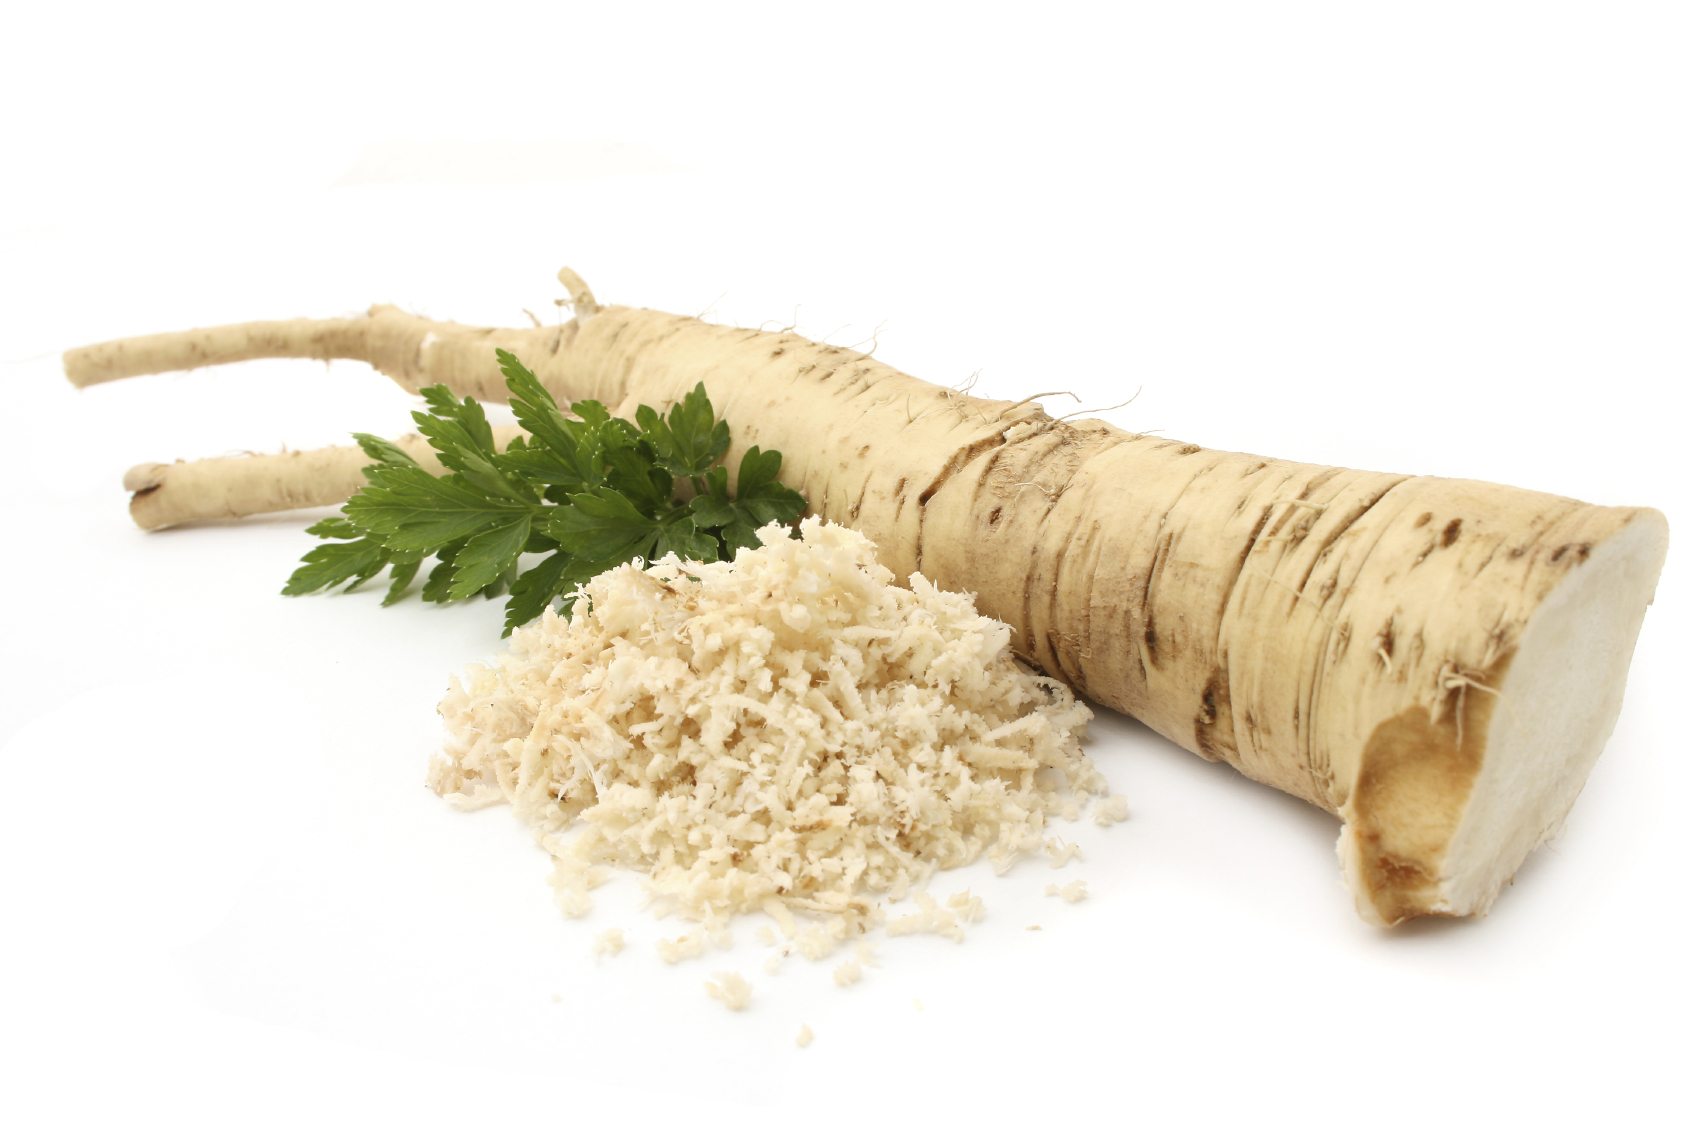 what is the best way to keep horseradish fresh